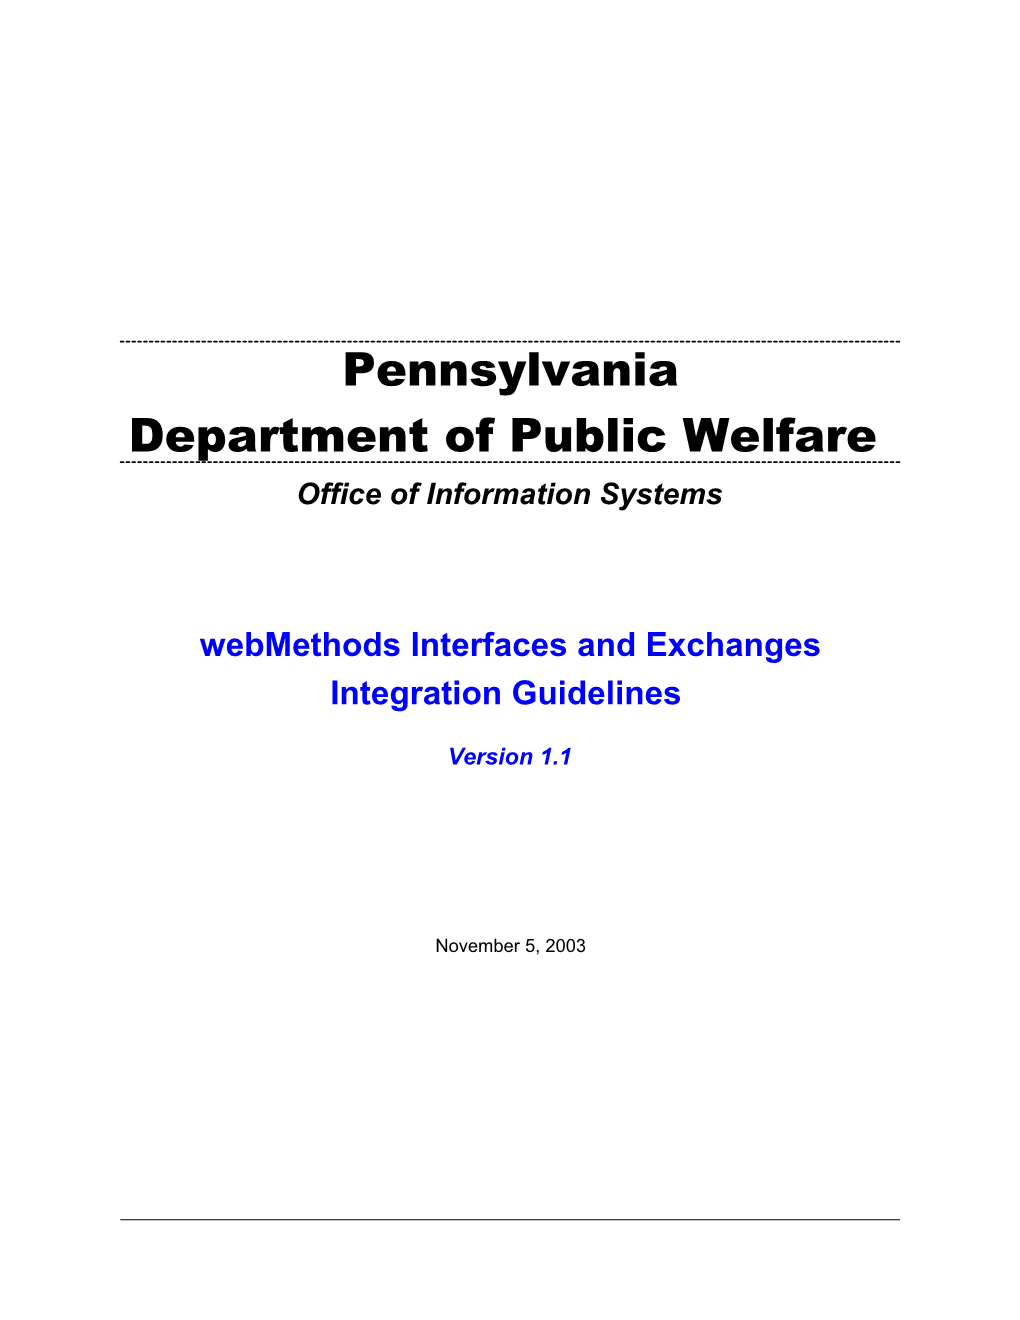 Webmethods Interfaces And Exchanges Integration Guidelines